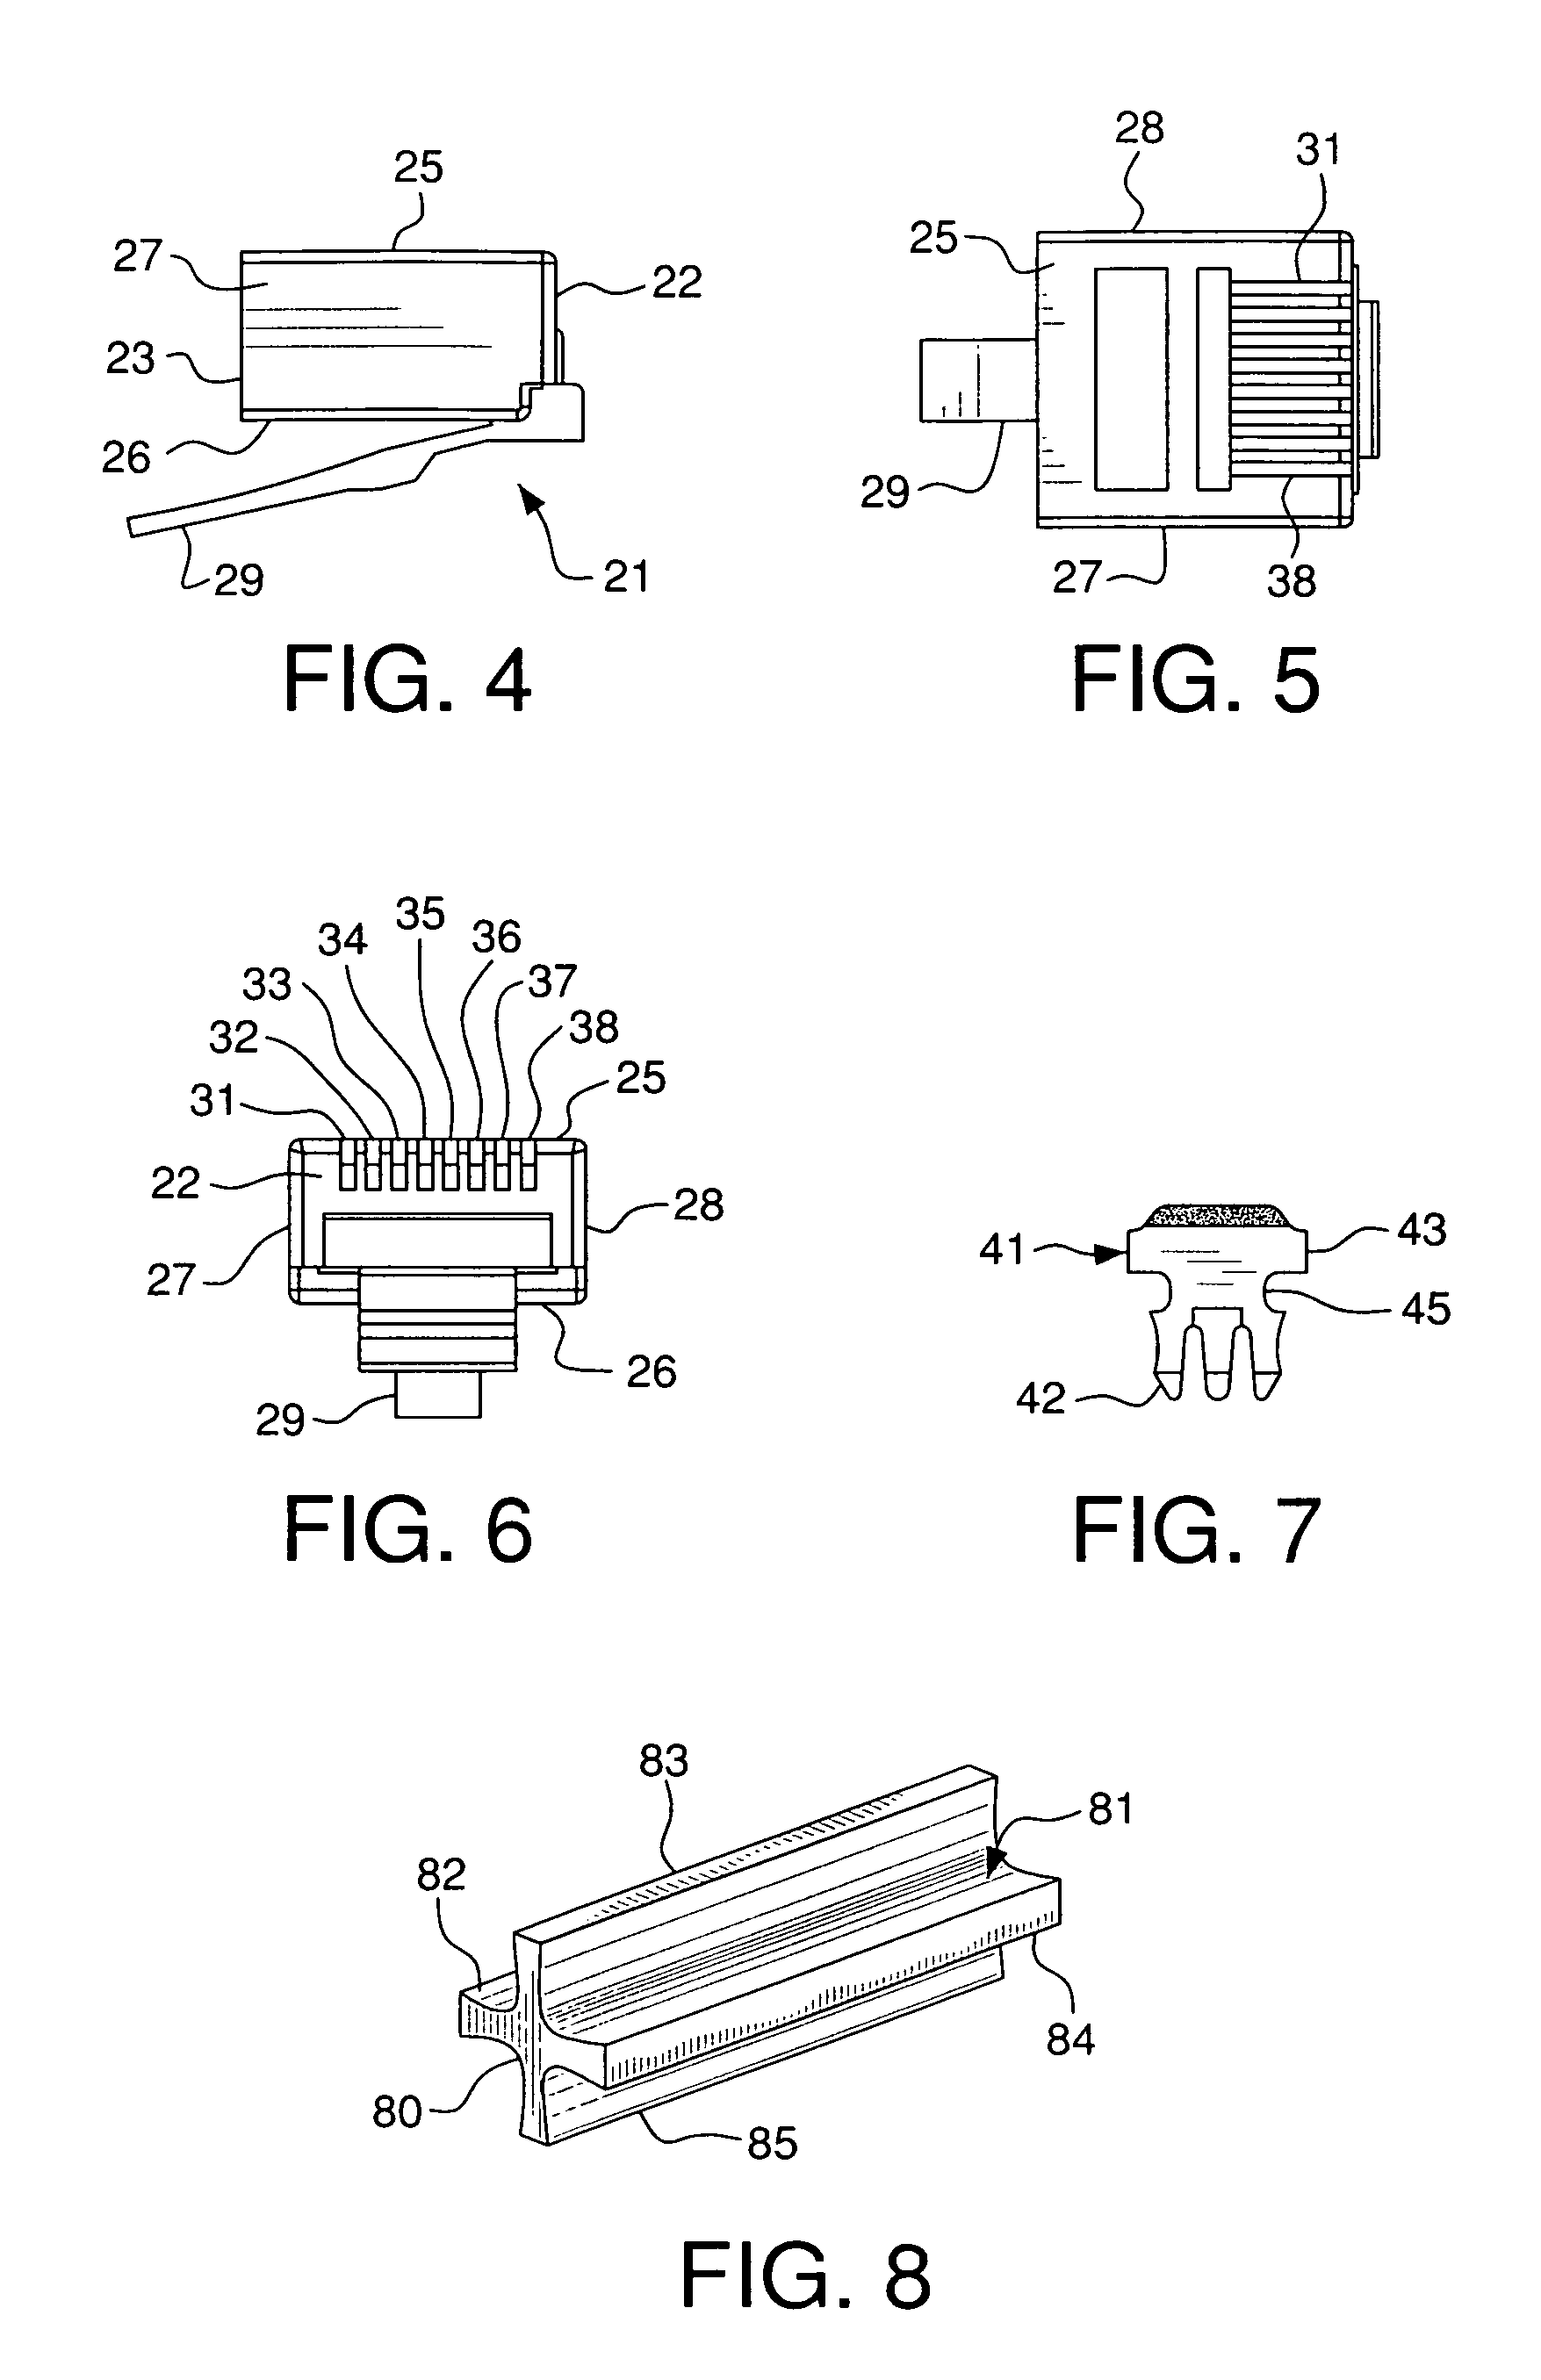 Dielectric insert assembly for a communication connector to optimize crosstalk